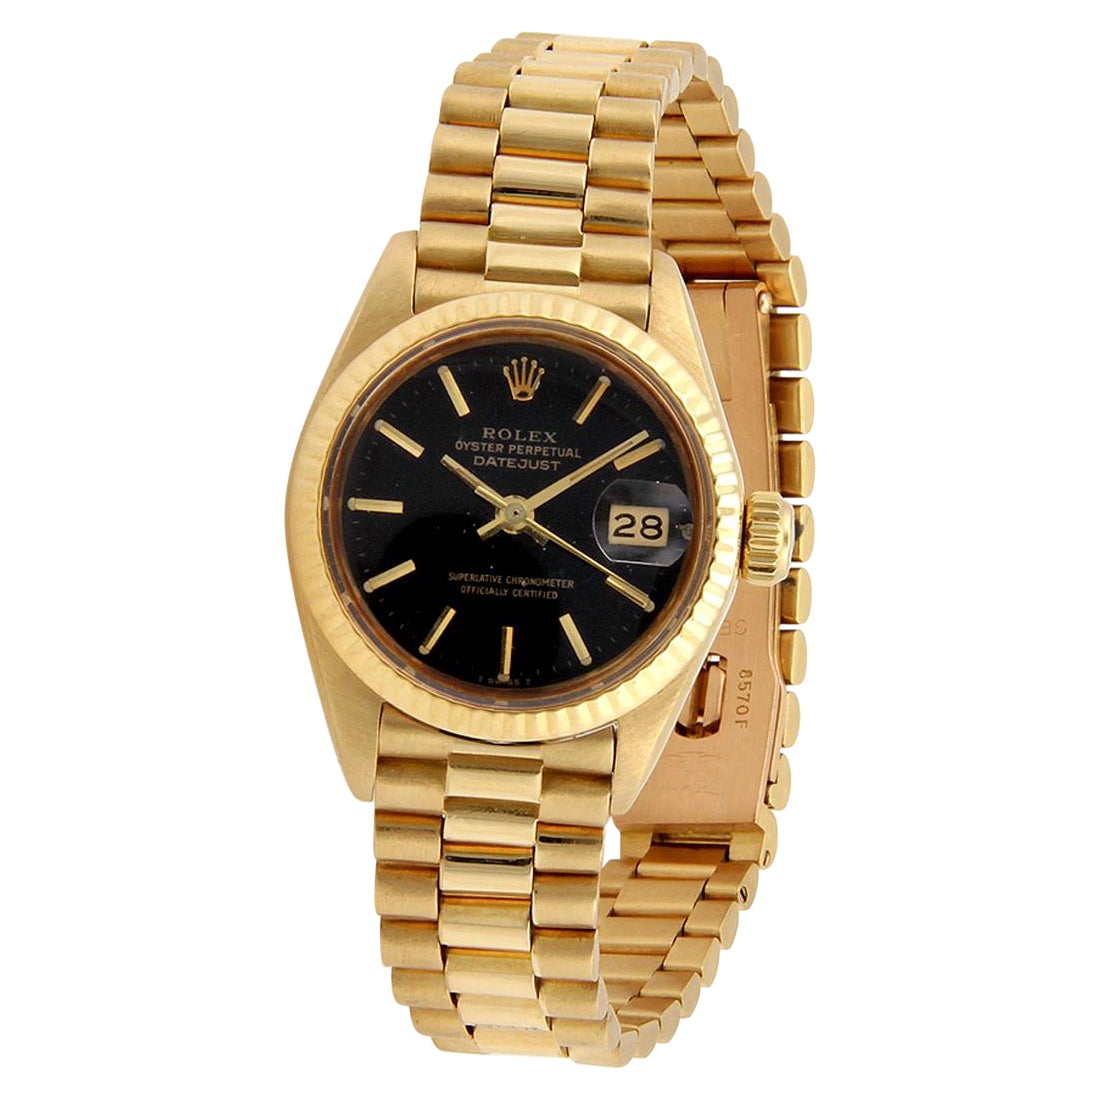 Rolex Oyster Datejust Automatic 18k Gold Black Dial Ladies Wrist Watch 6917 For Sale